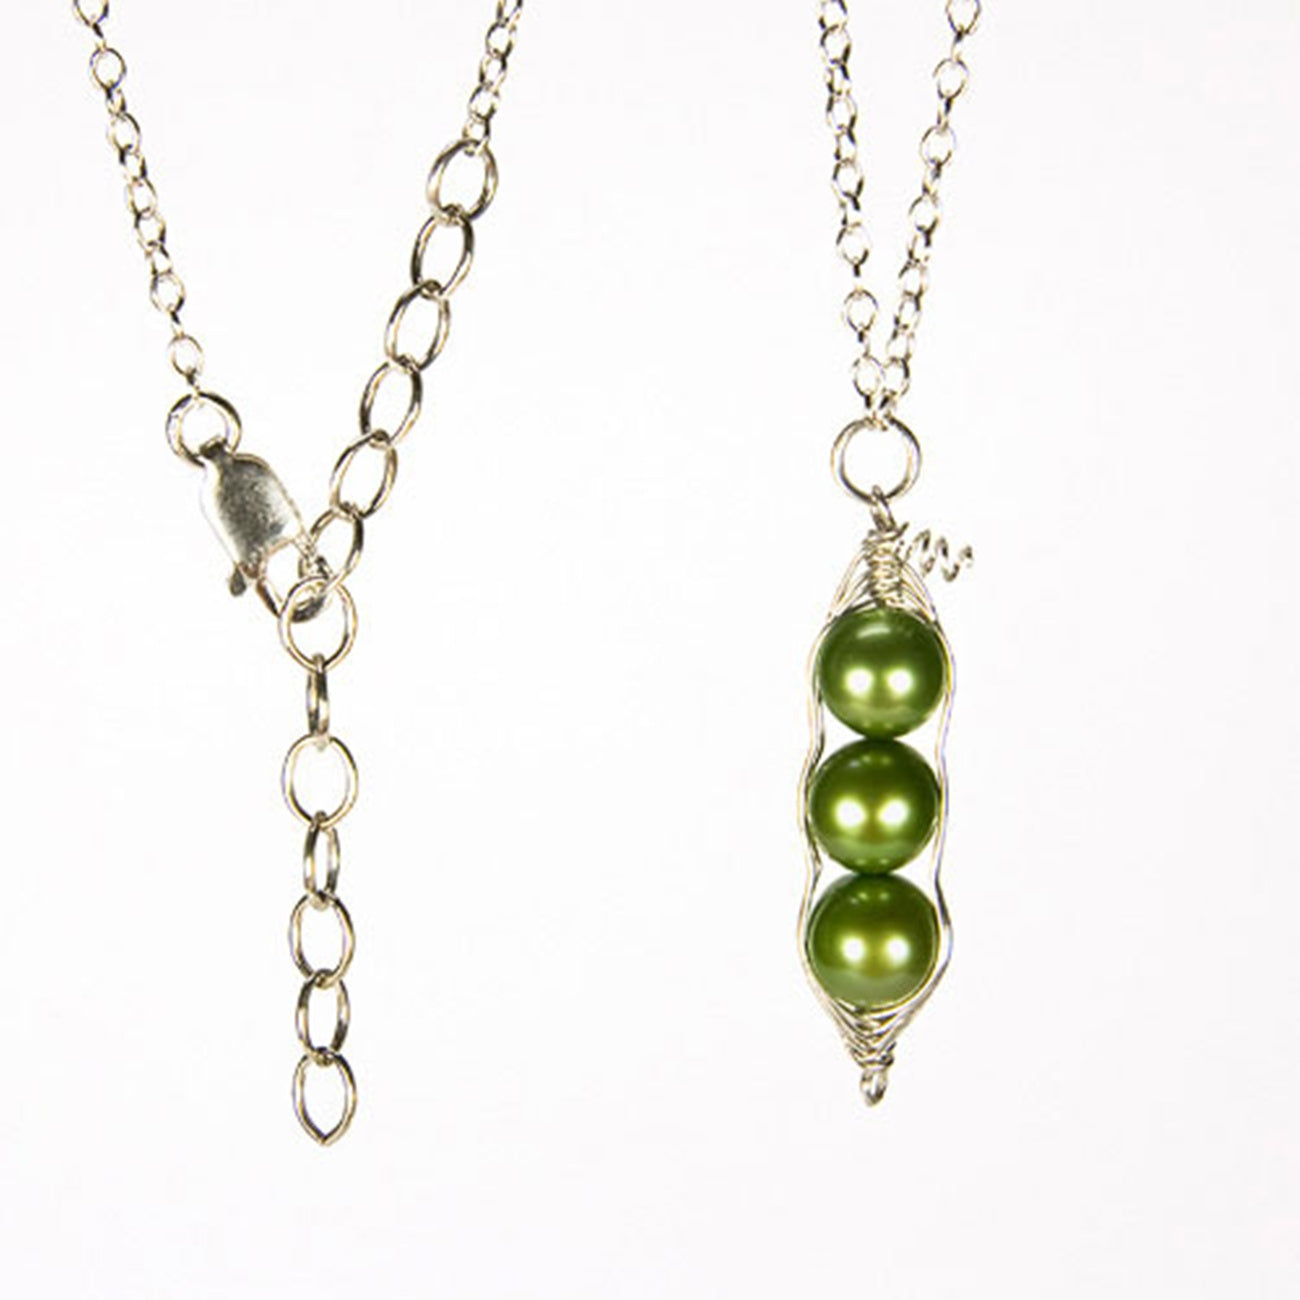 Three Peas in a Pod Freshwater Pearl Necklace